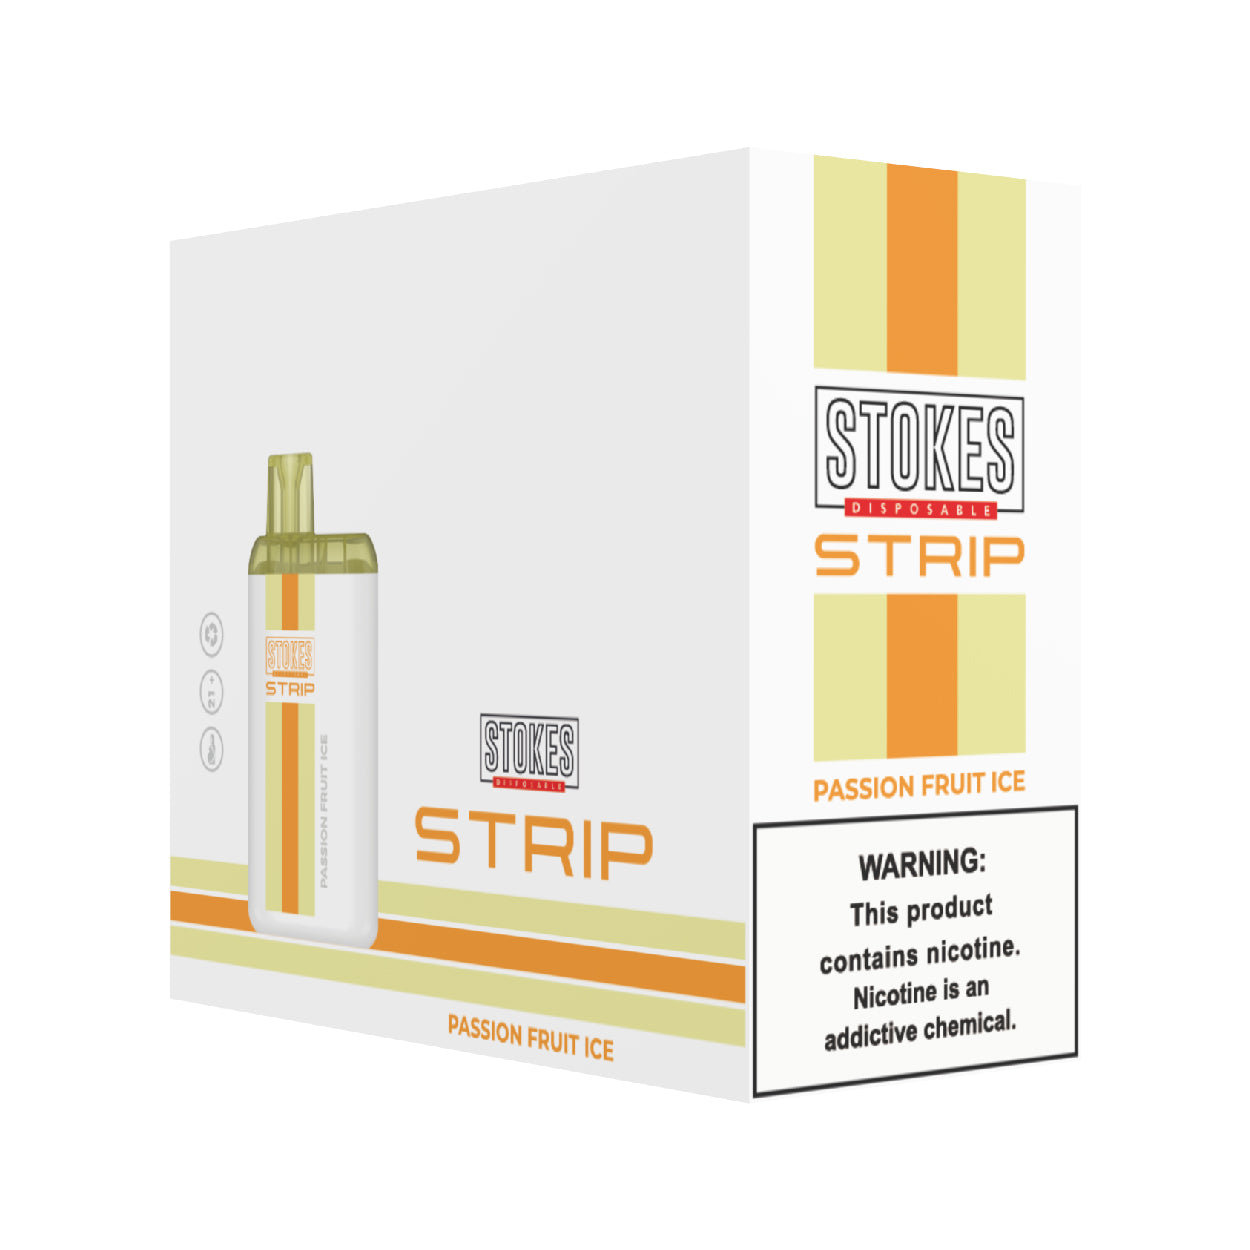 STOKES Strip - 5% Nic. (Disposable Device) - 4000 Puffs - Passion Fruit Ice